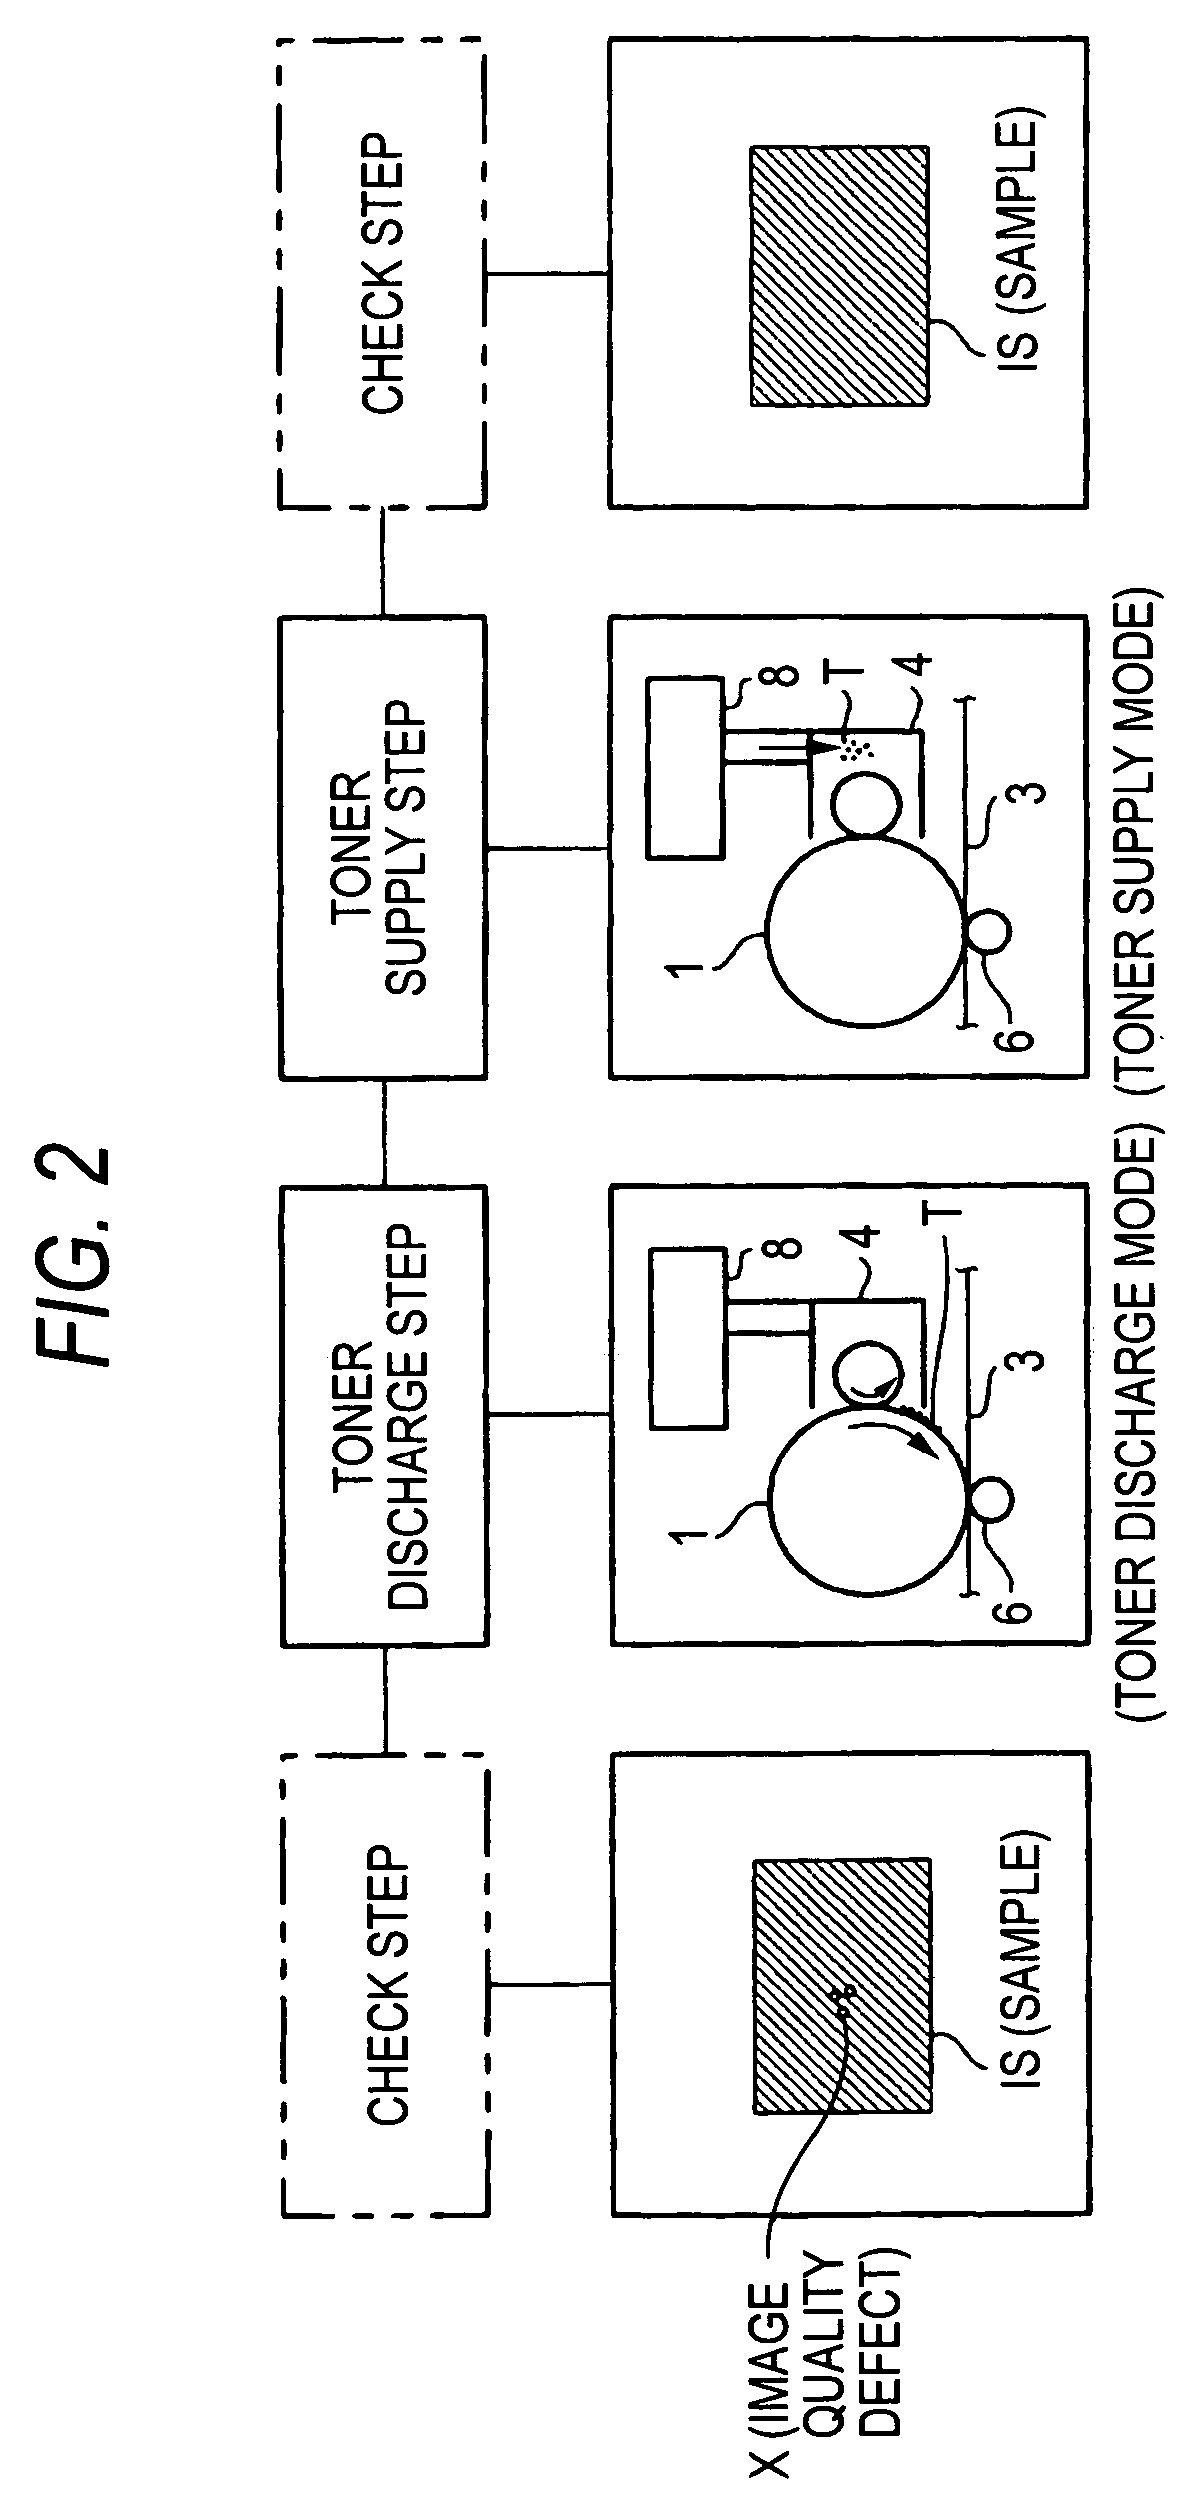 Image forming apparatus and treatment thereof